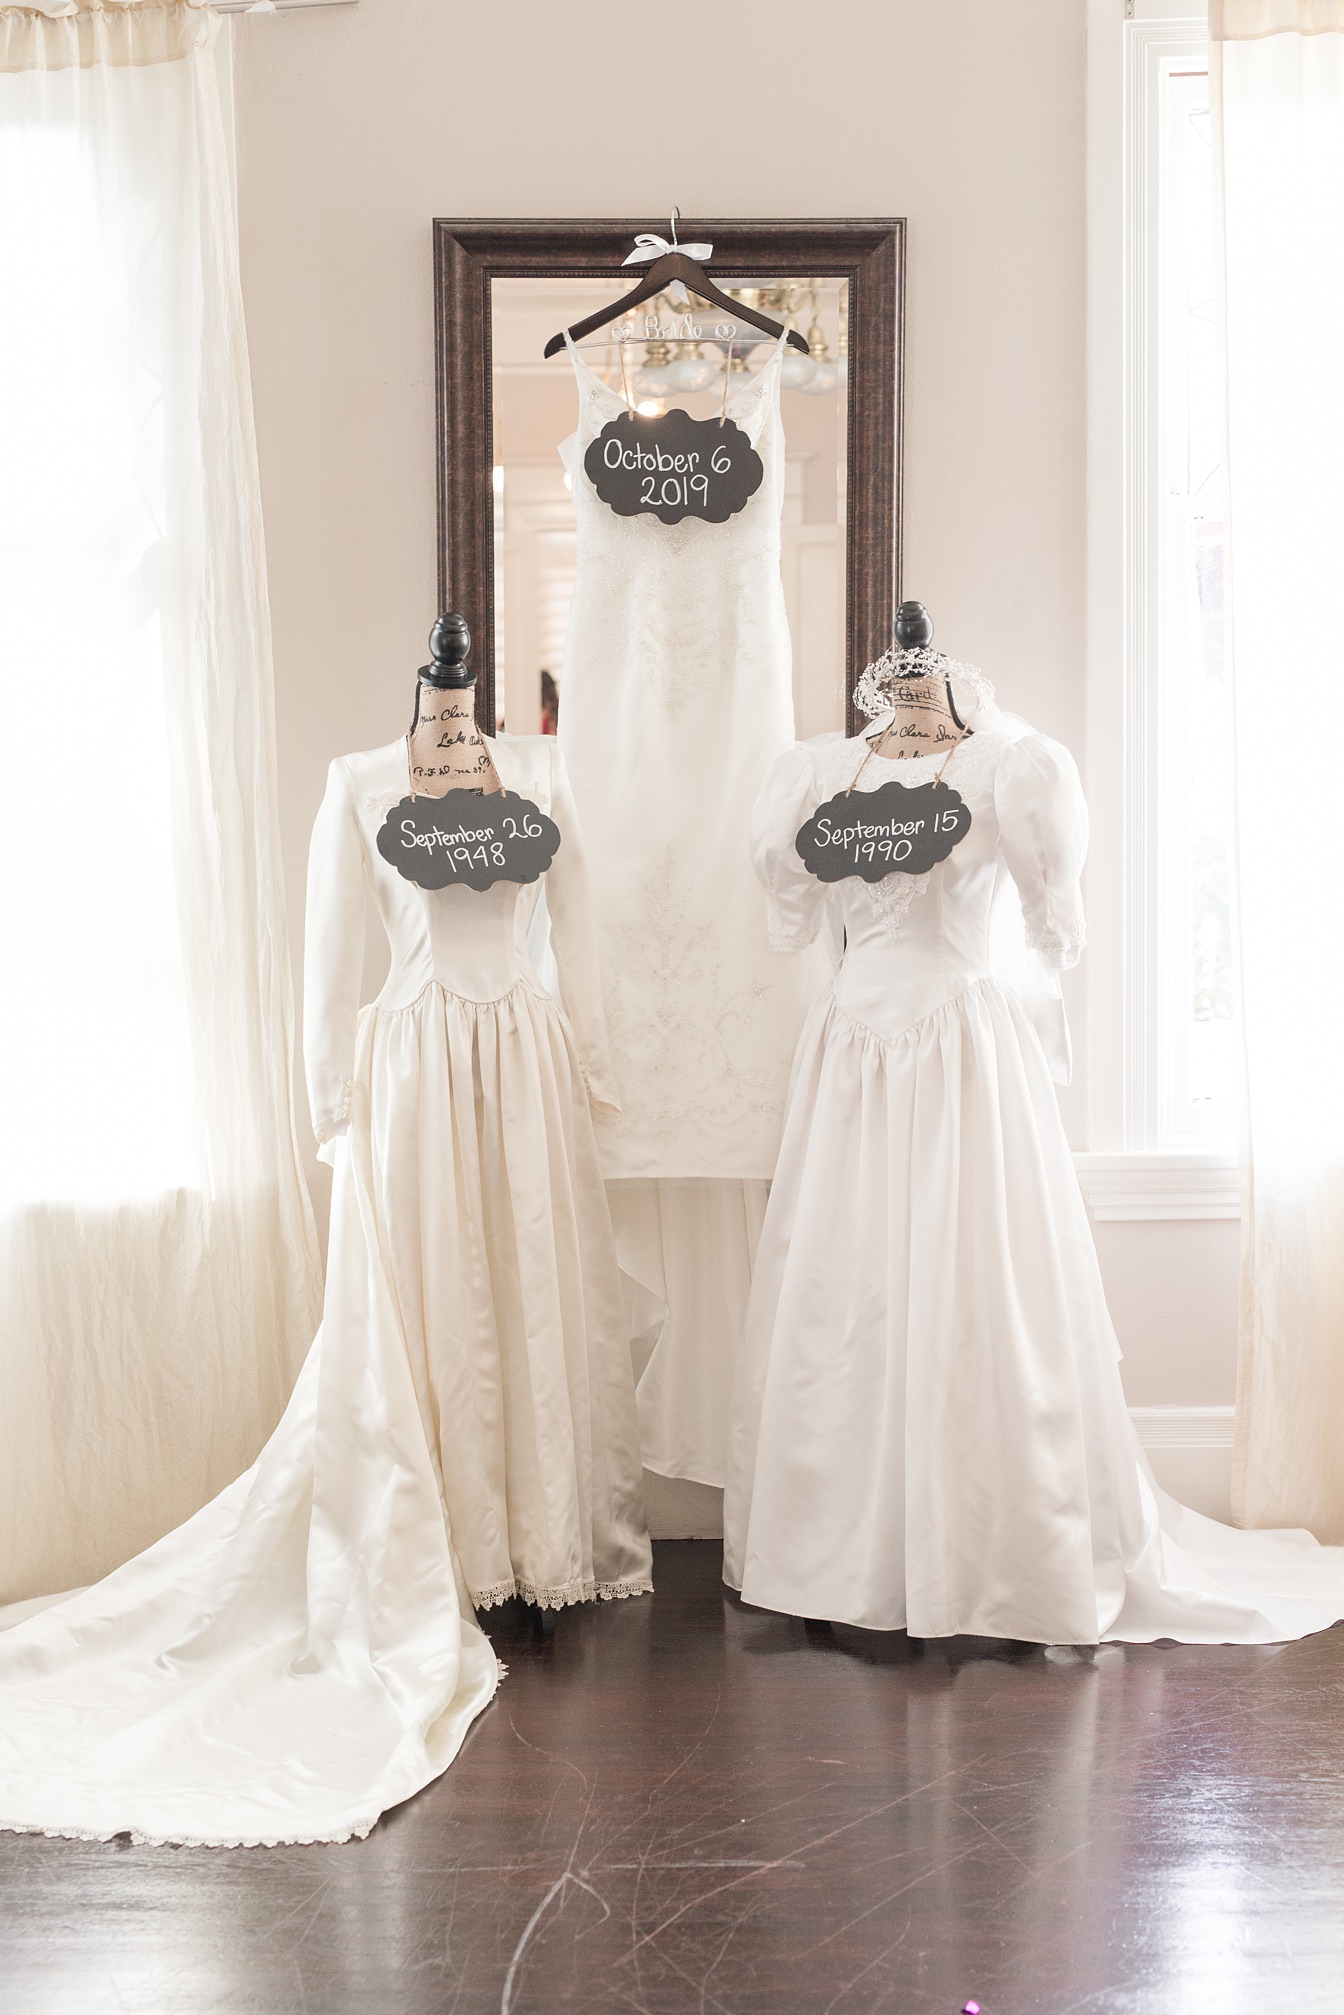 Brides Wedding Dress with Mom's and Grandmother's Wedding Dresses by Adrienne & Dani Photography